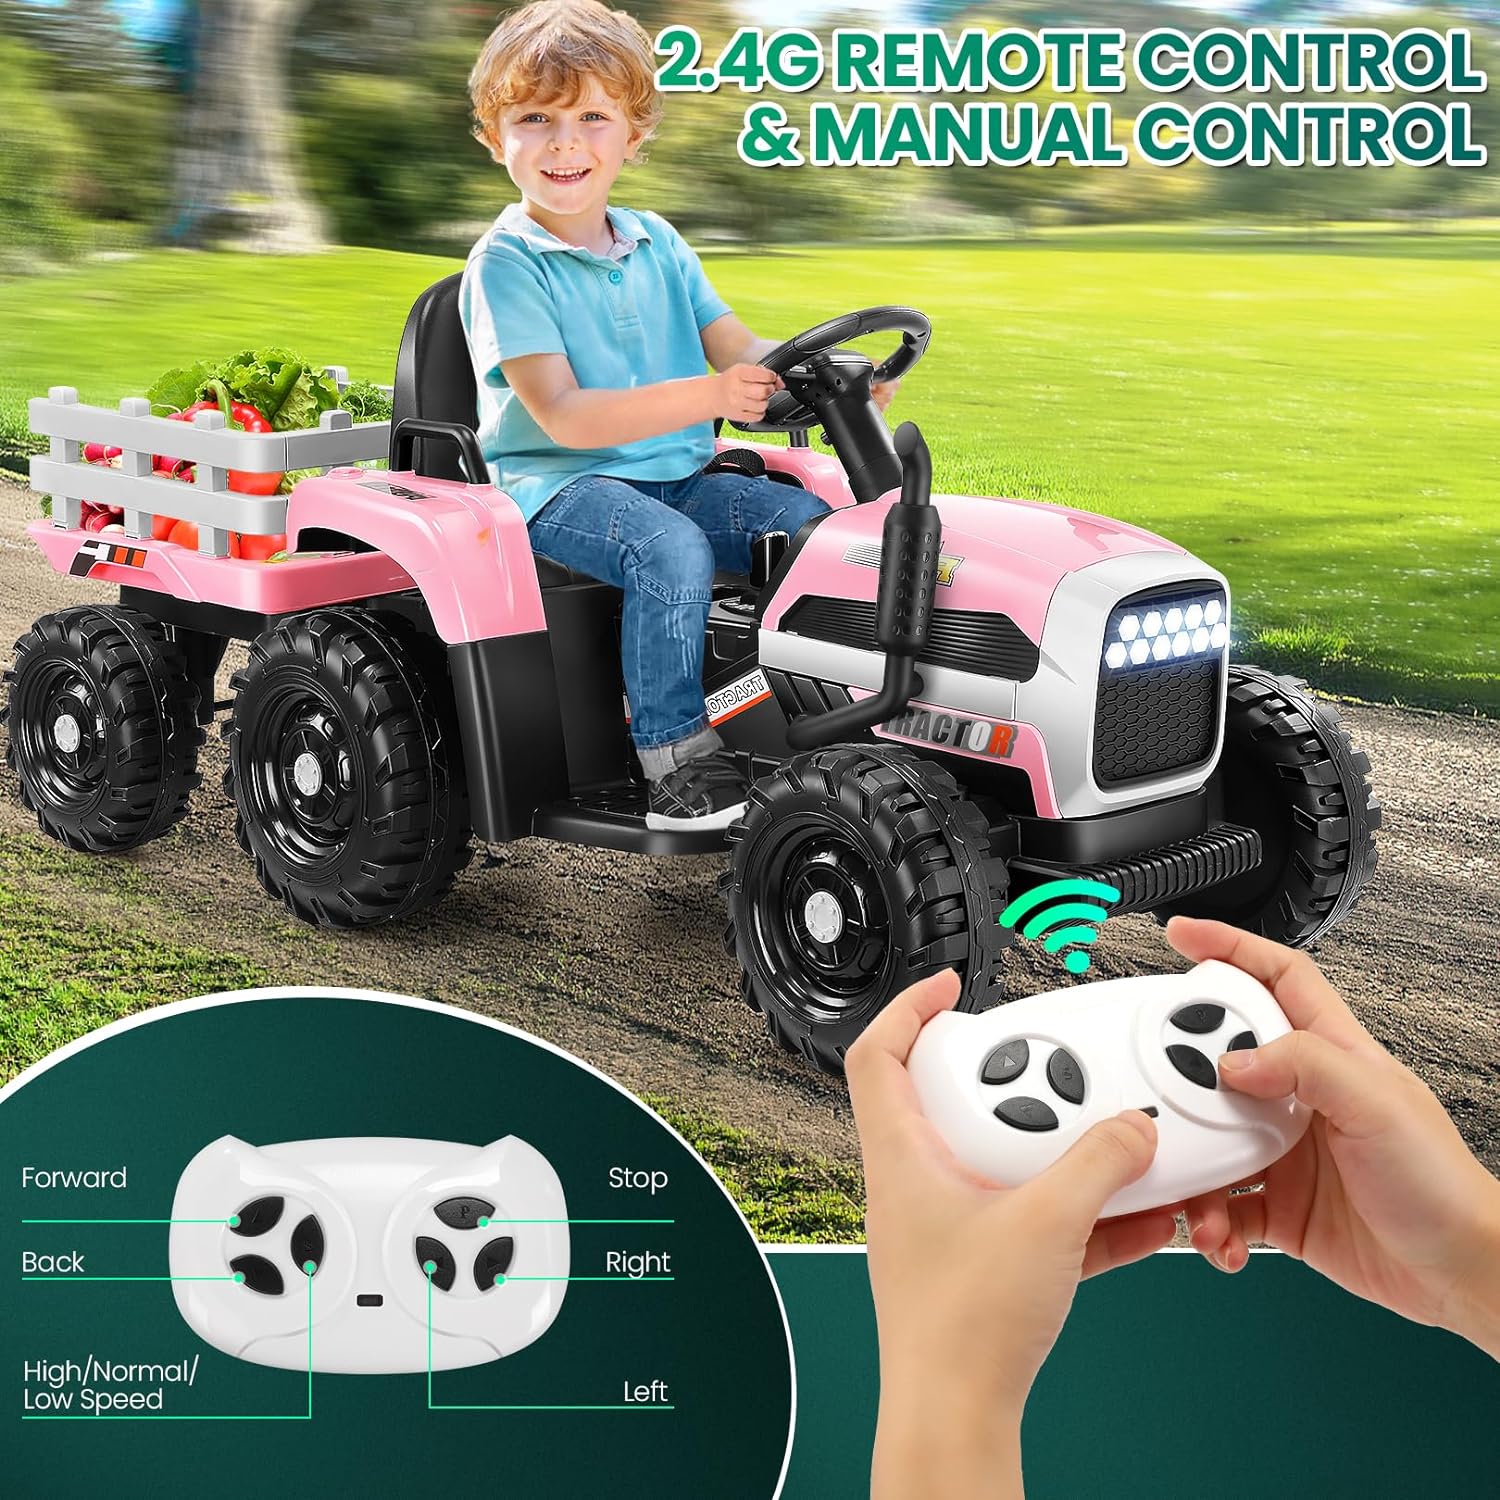 Dreamer 12V Kids Ride on Tractor with Trailer, Battery Powered Ride on Toy Car w/ Music, USB, LED Light, Horn, Outdoor Kid Pickup Truck